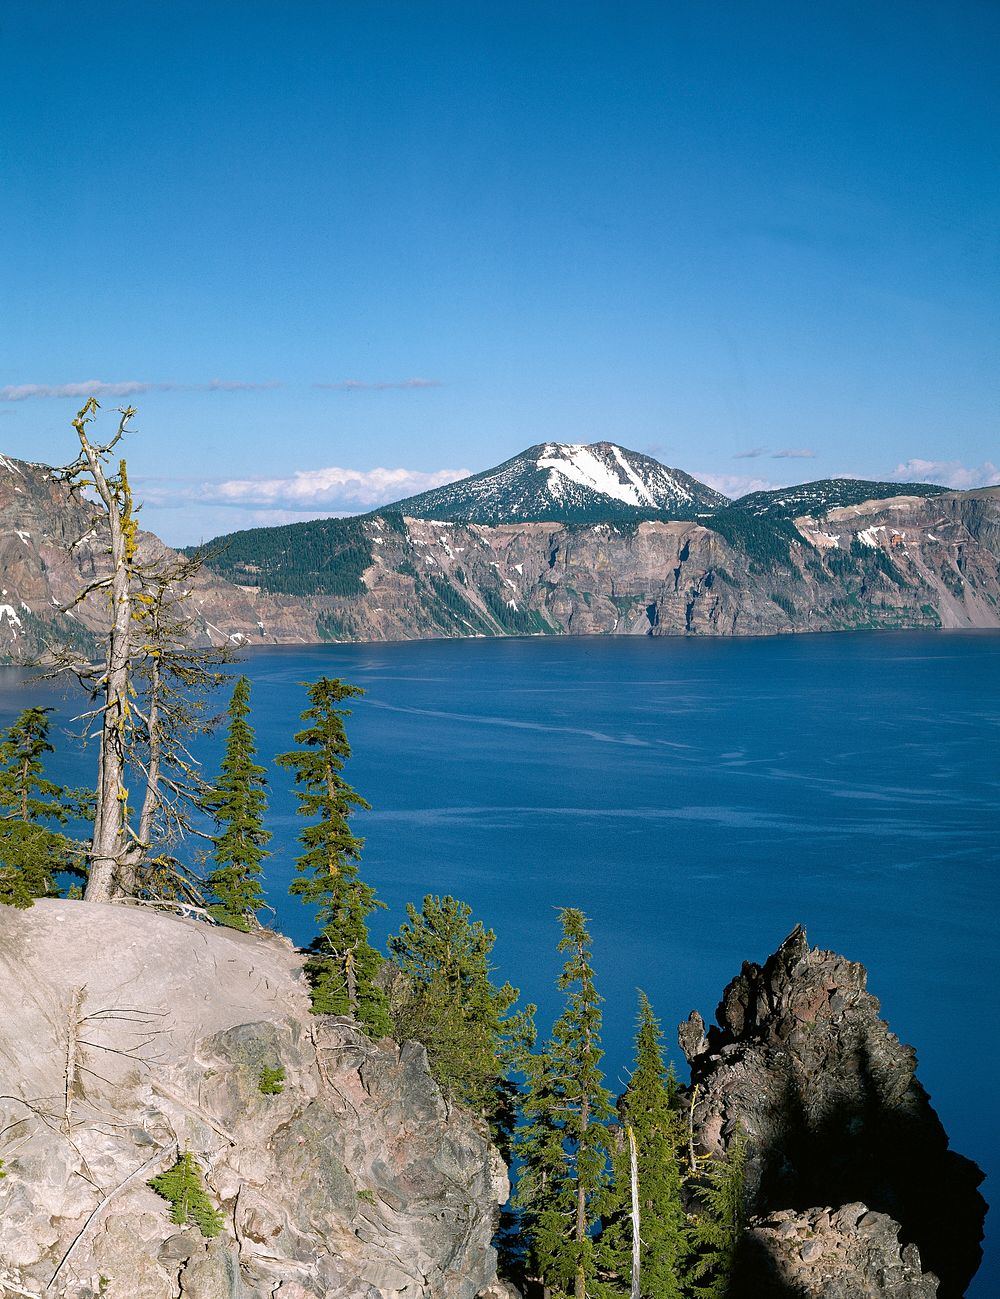 Crater lake in Oregon. Original image from Carol M. Highsmith&rsquo;s America, Library of Congress collection. Digitally…